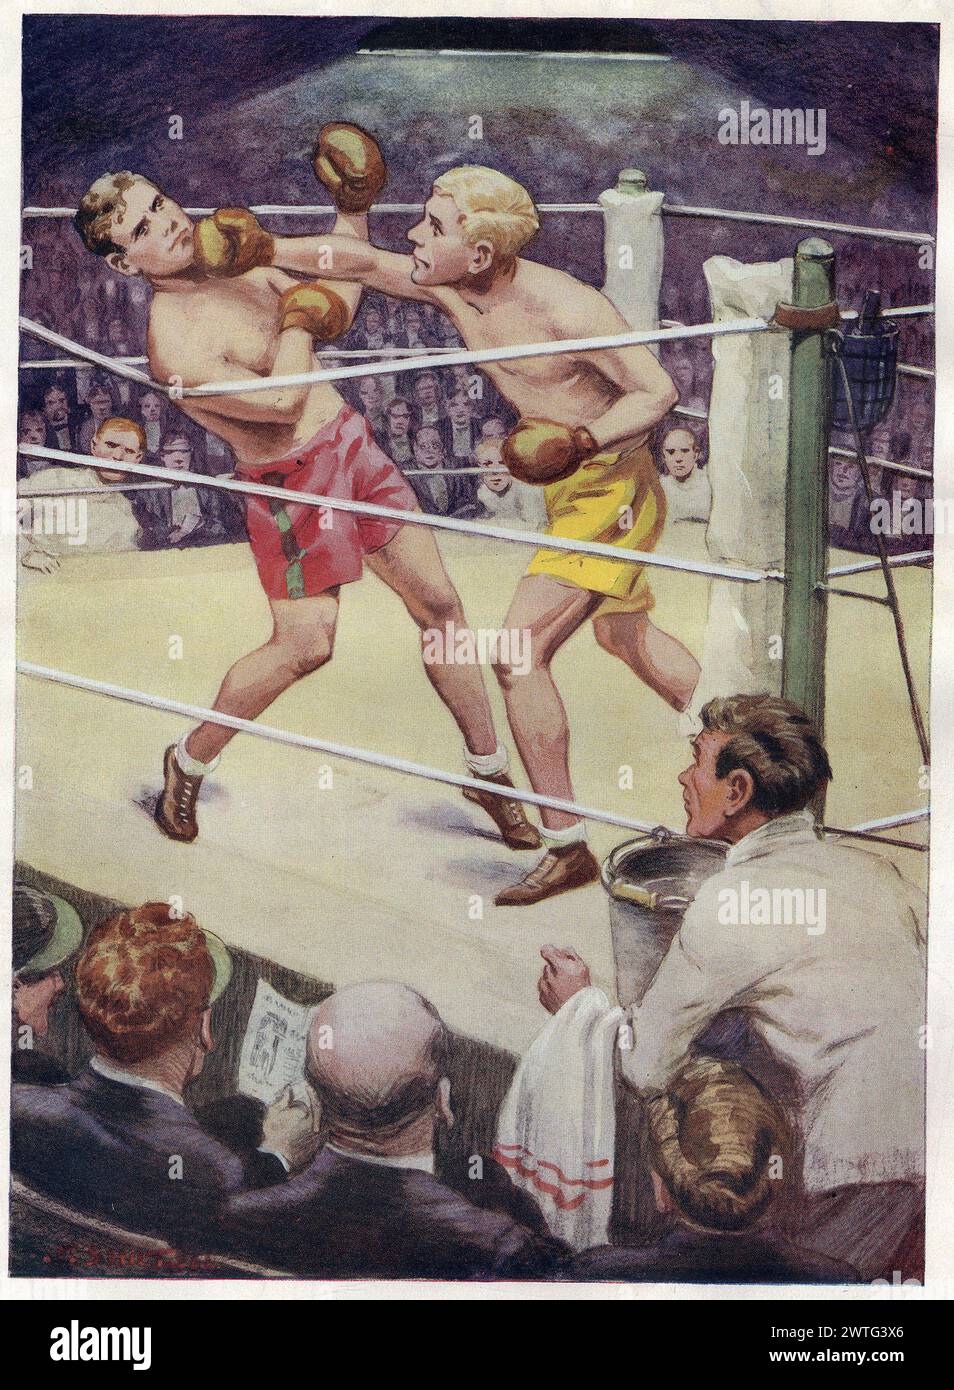 COLOUR PLATE TITLED 'KNOCK OUT' APPEARED IN CHUMS, AN ILLUSTRATED MAGAZINE FOR BOYS PRINTED IN 1916 Stock Photo